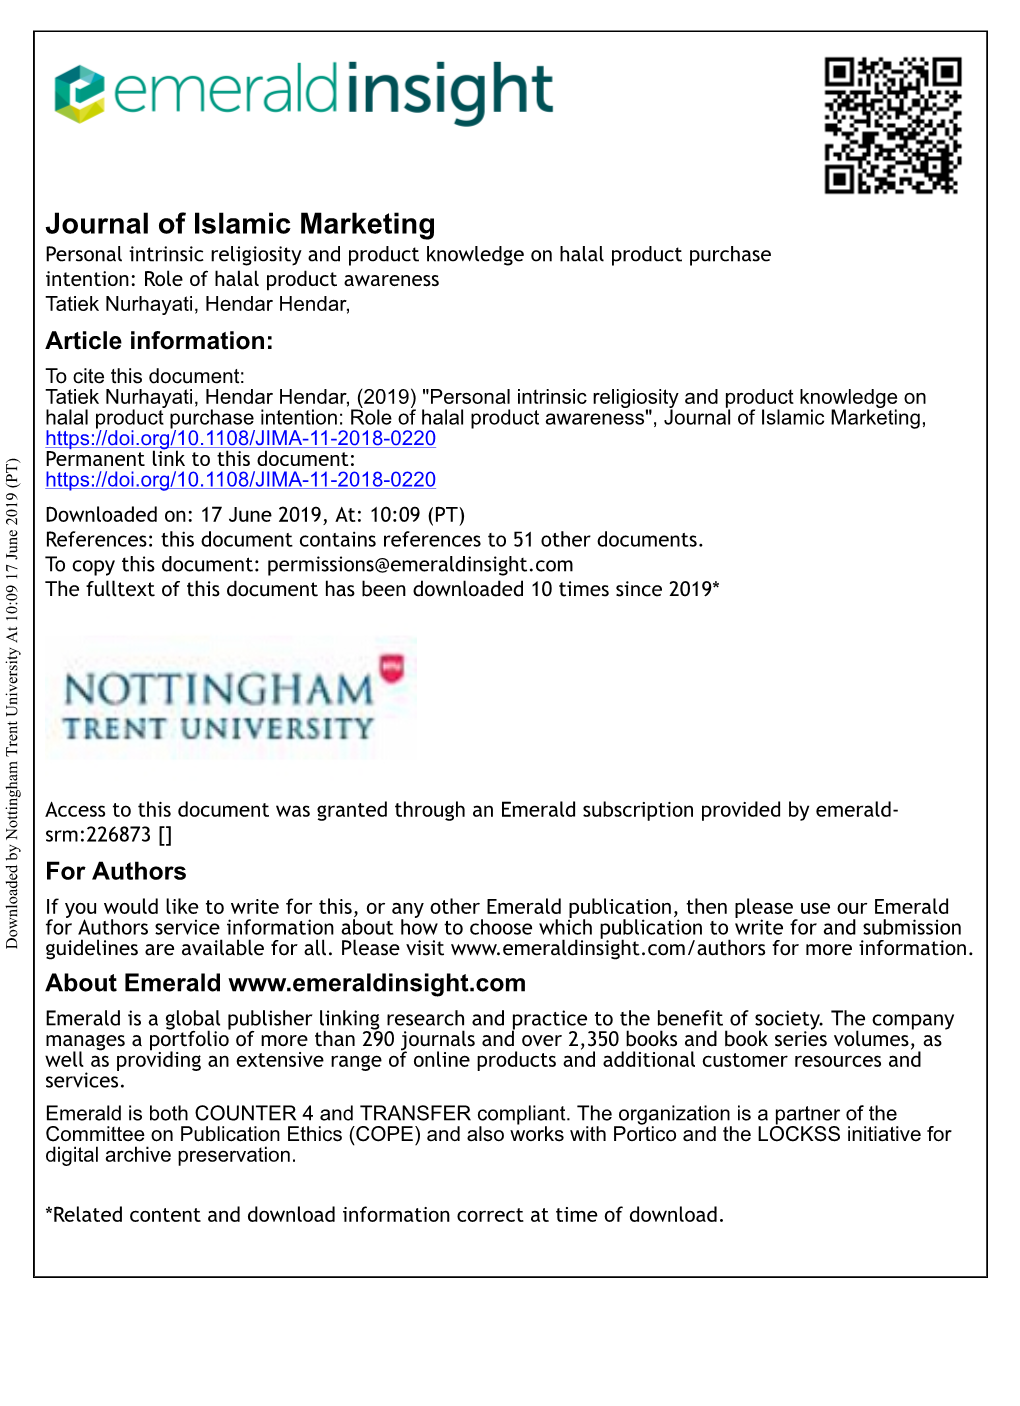 Personal Intrinsic Religiosity and Product Knowledge on Halal Product